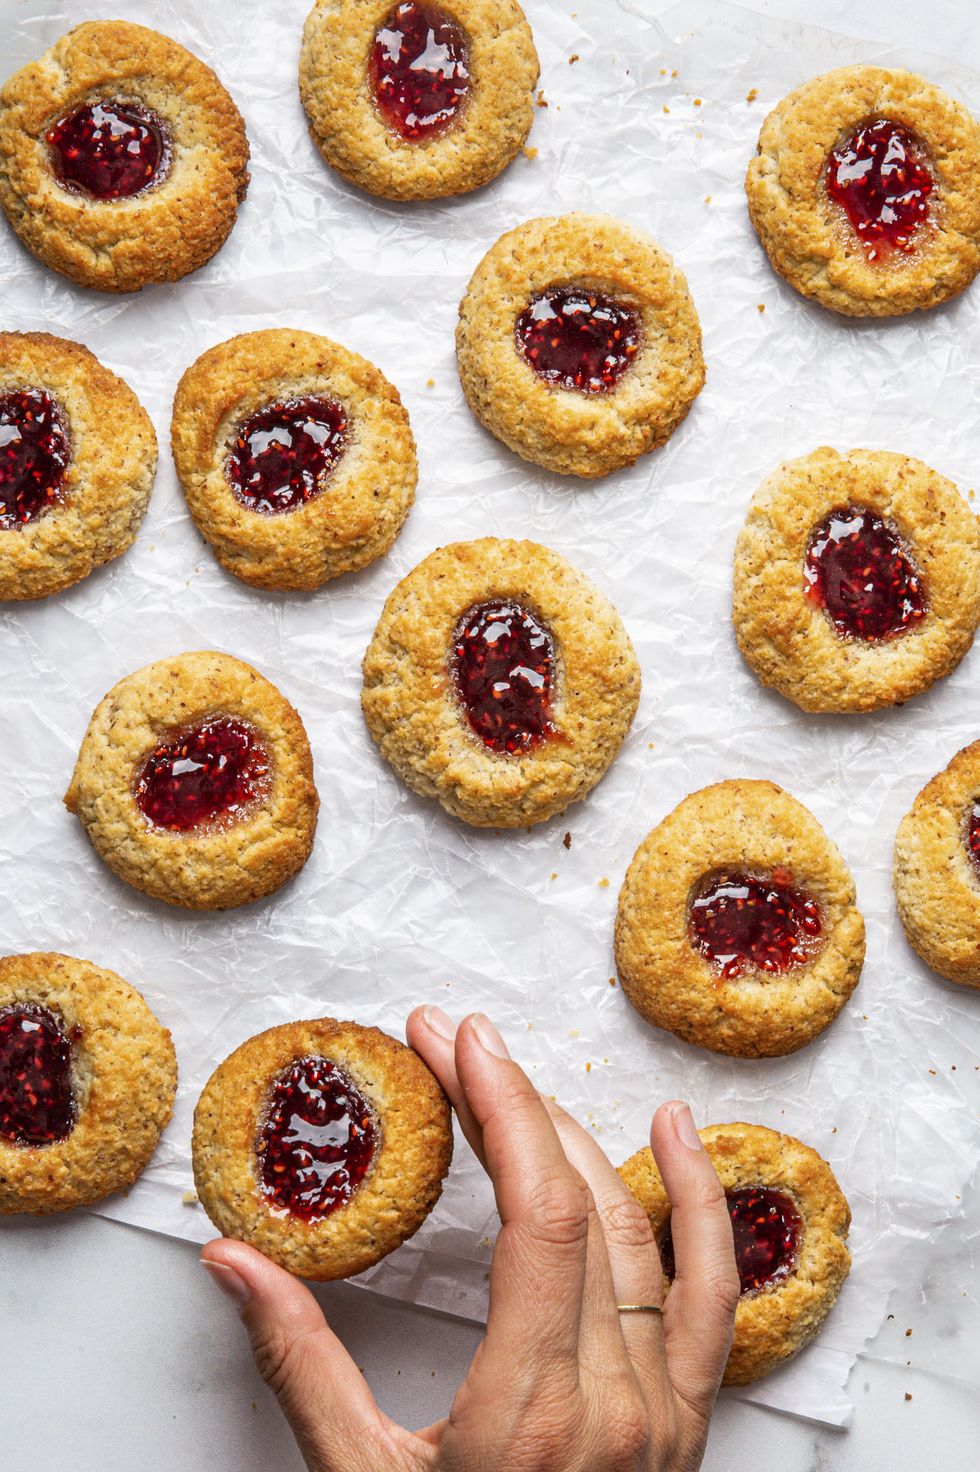 16 Passover-Friendly Cookie Recipes - Flourless Passover Cookies